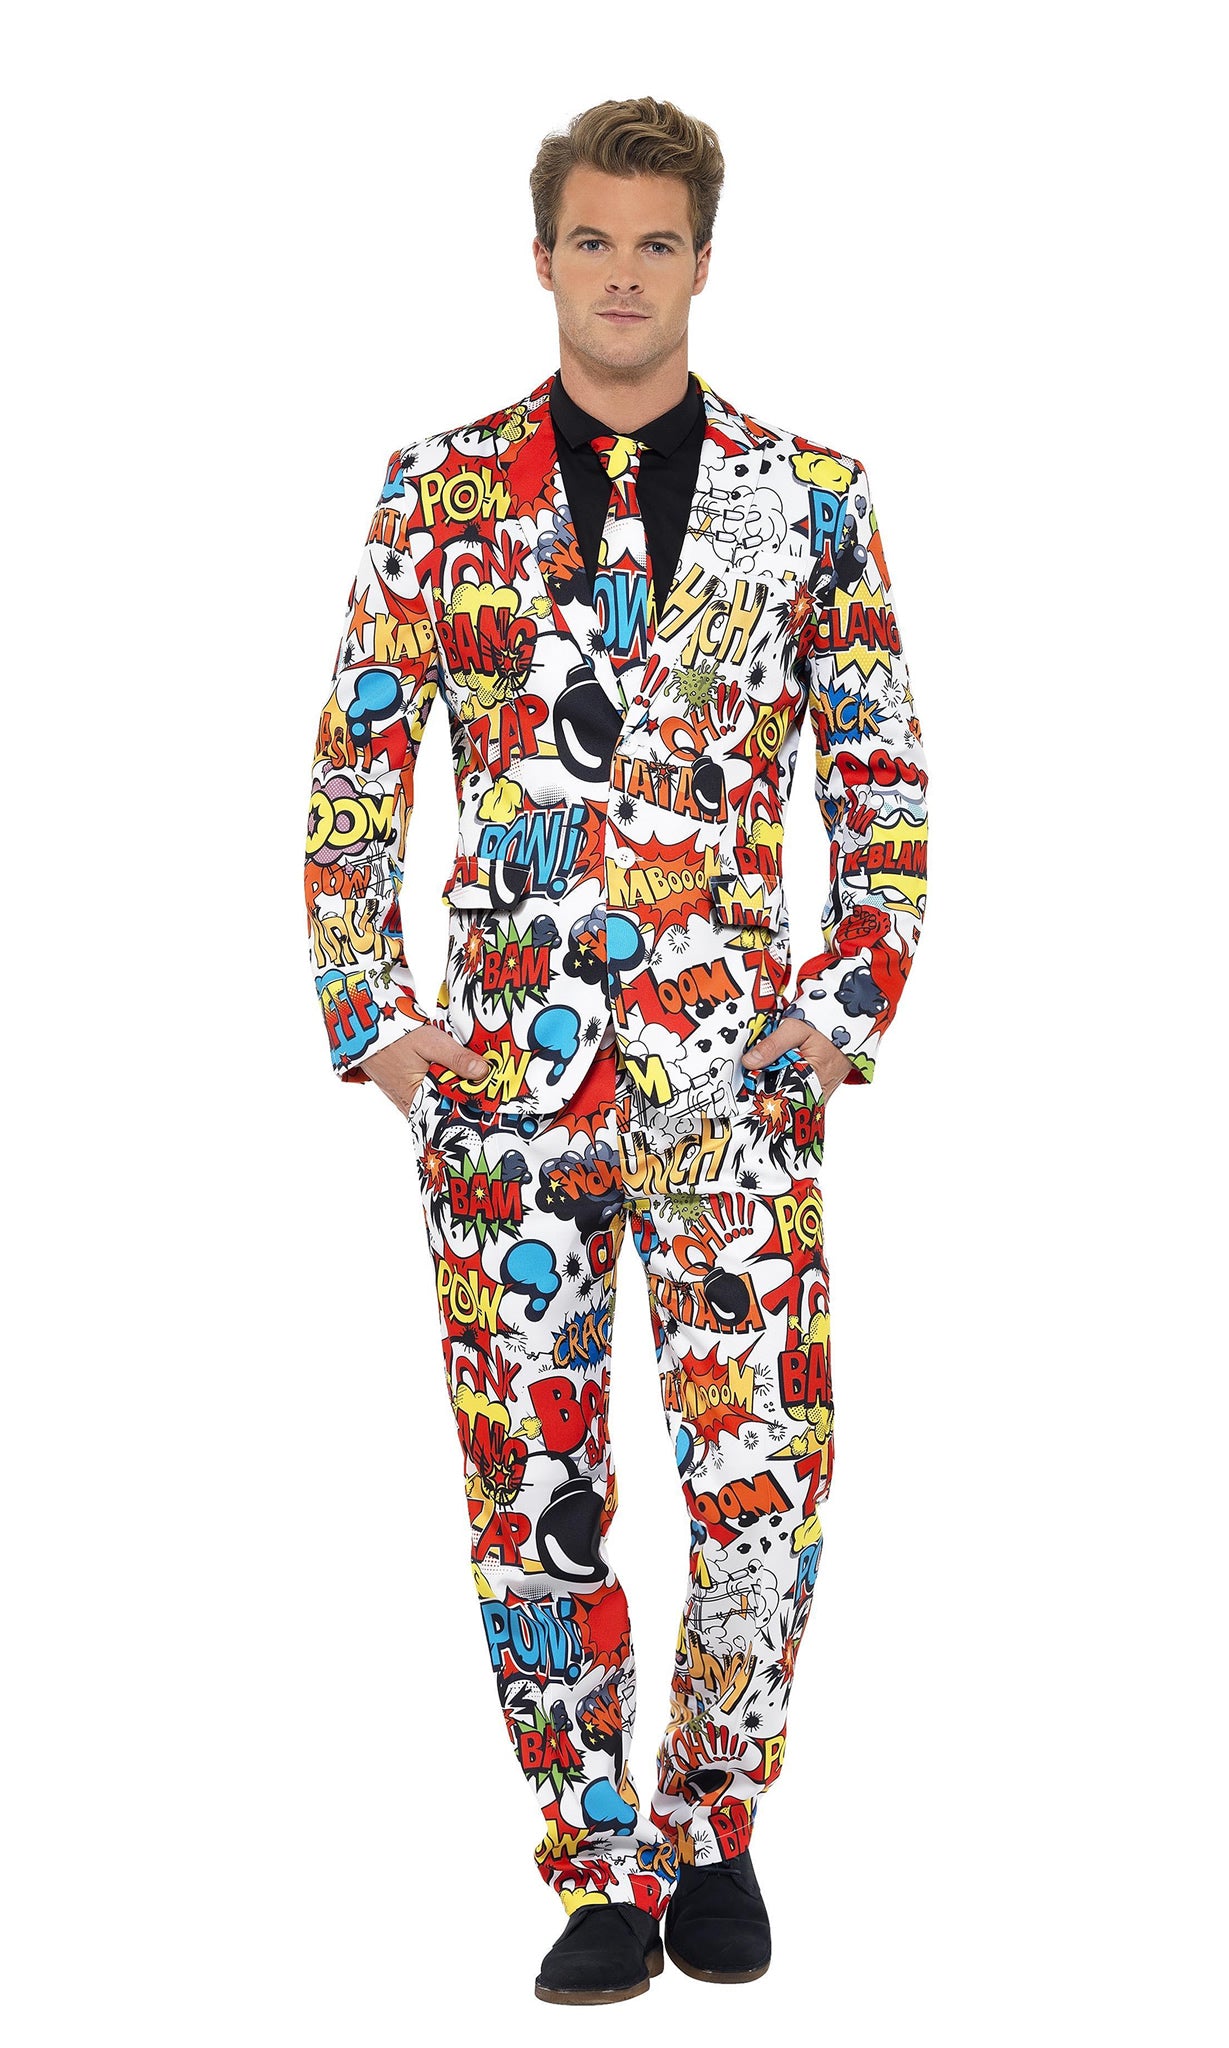 Comic strip suit and tie